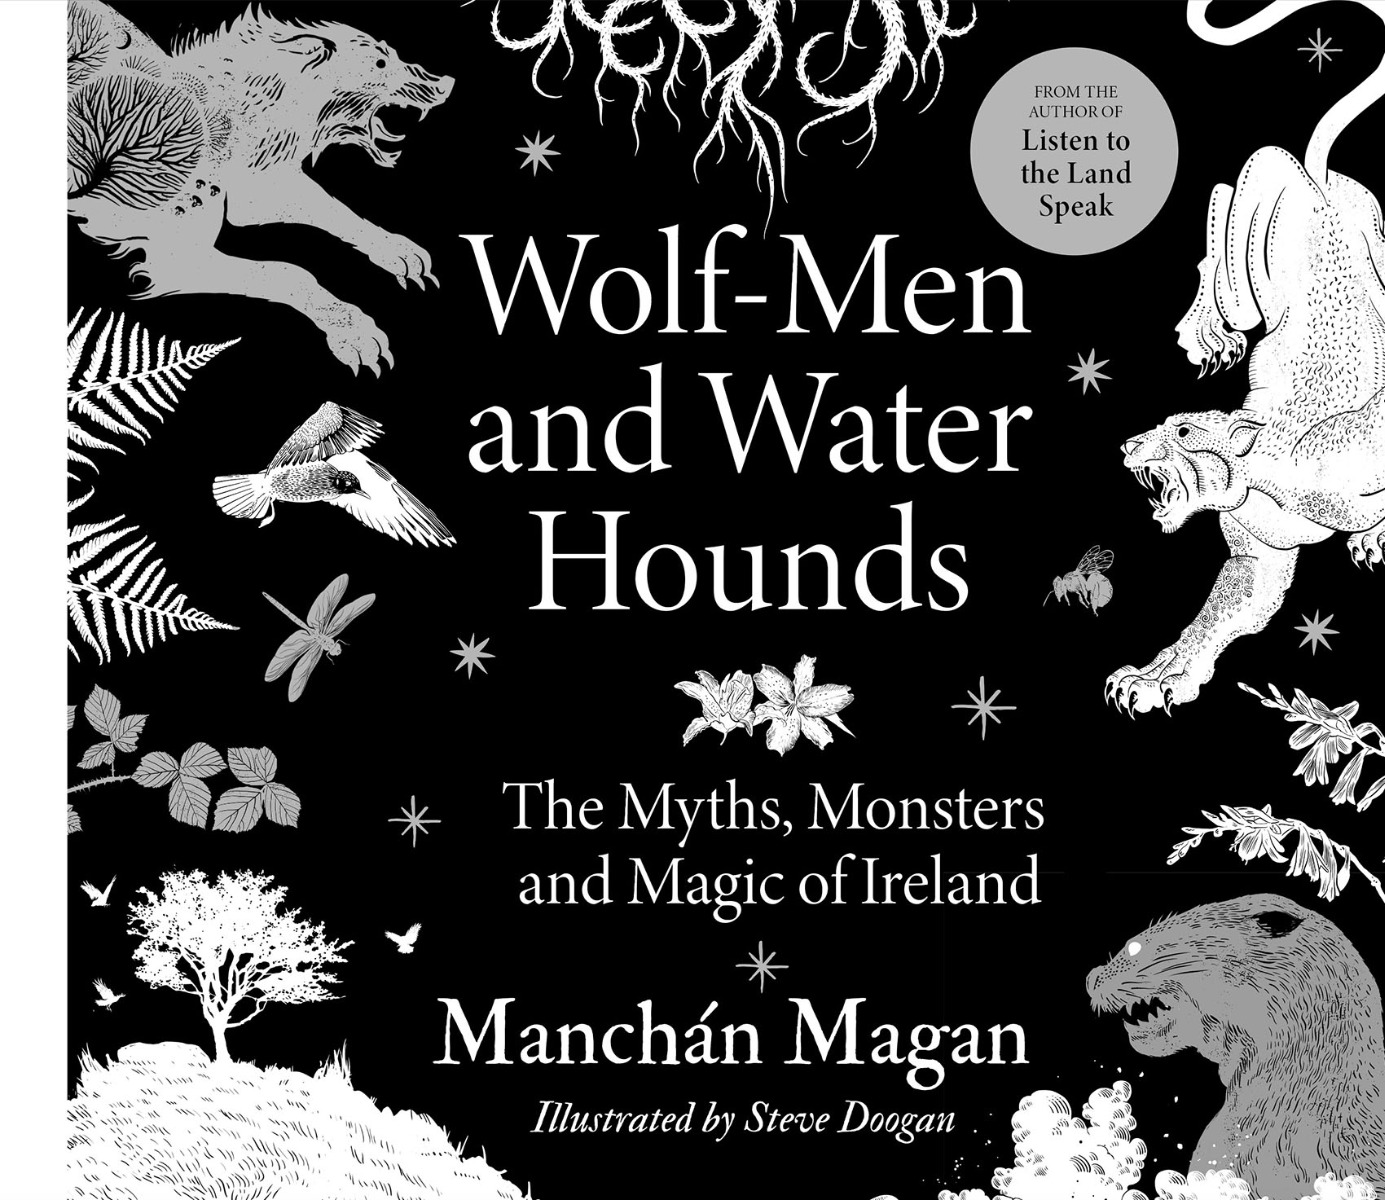 Wolf-Men and Water Hounds: The myths, monsters and magic of Ireland